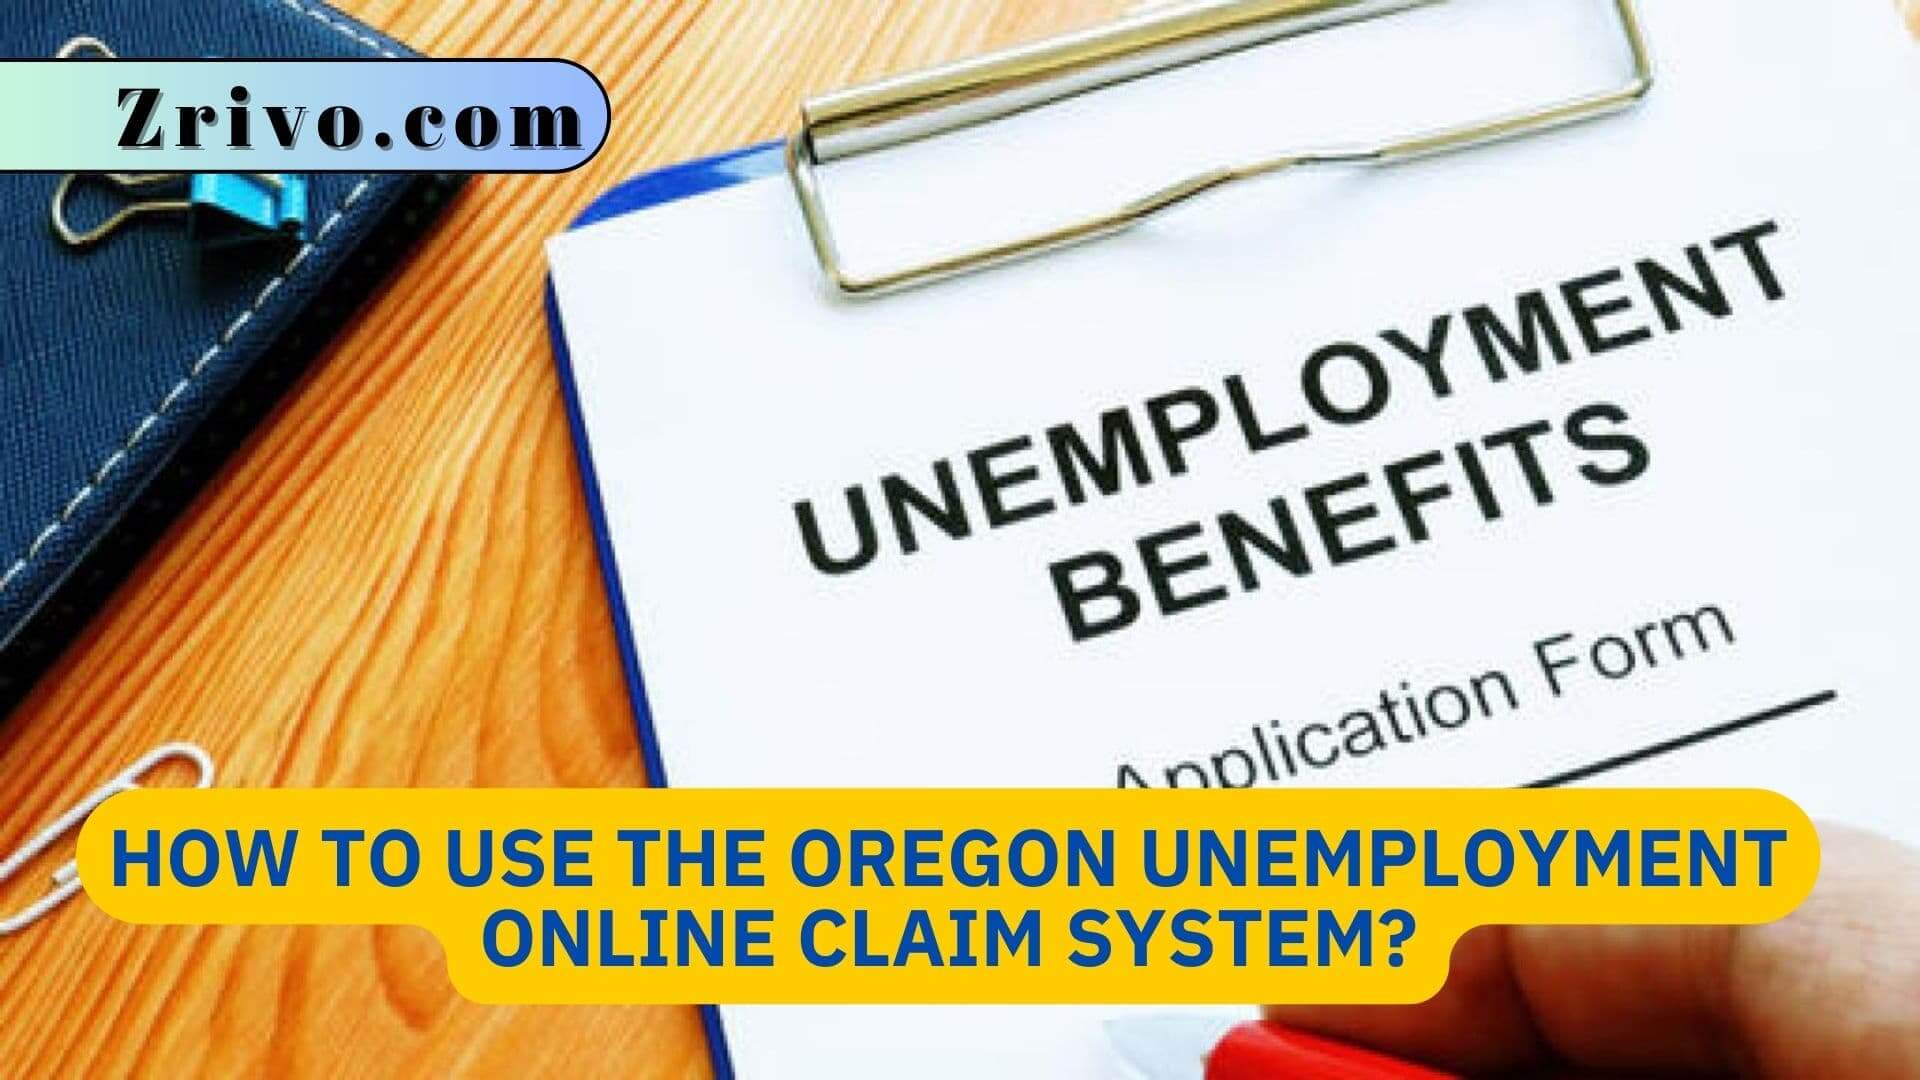 How to Use the Oregon Unemployment Online Claim System